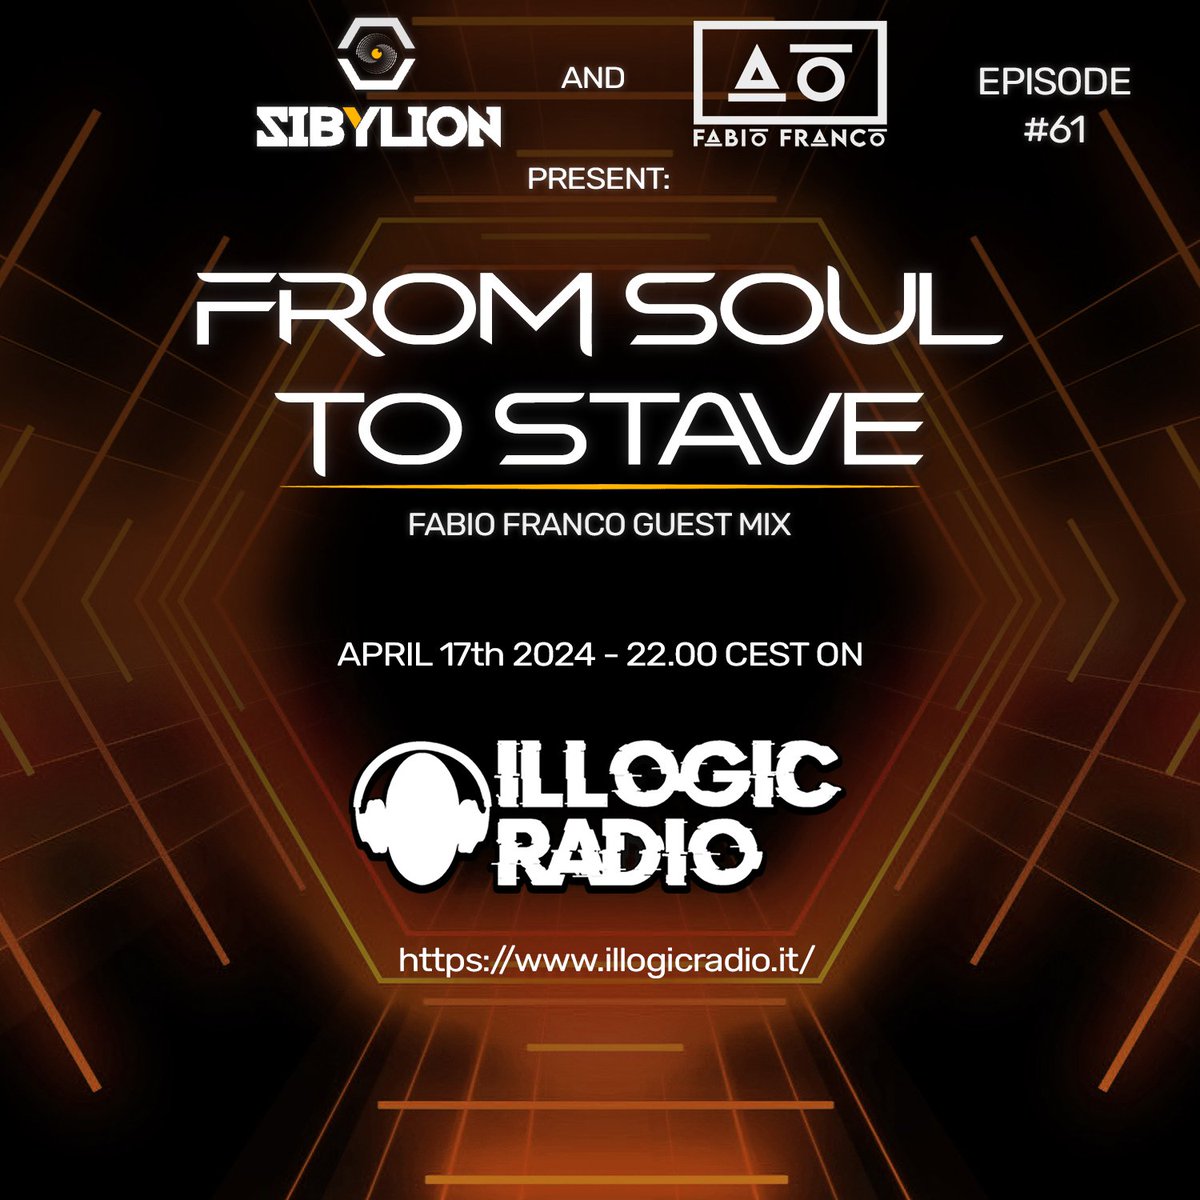 Are you ready for a special guest mix? Today, 10pm CEST, coordinates Illogic Radio! FSTS #61 @fabiofrancodj1 guest mix will wait for you! 
Link to listen: illogicradio.it

#trancefamily #sibylion #fromsoultostave #radioshow